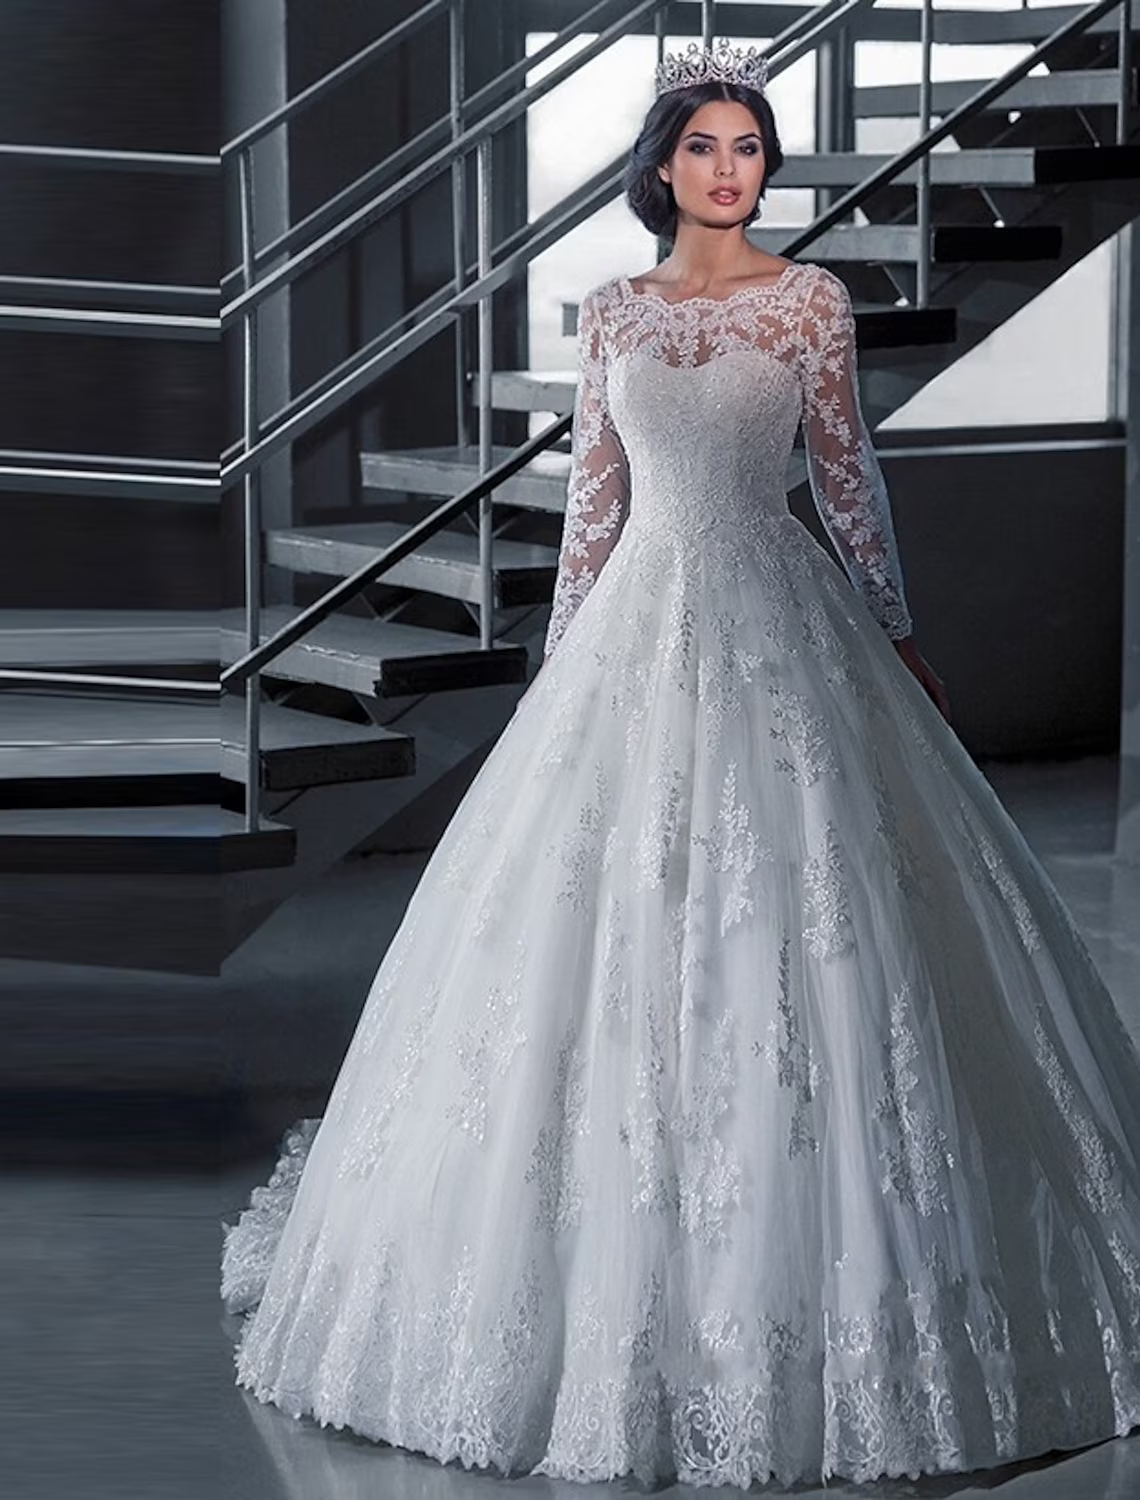 Engagement Formal Wedding Dresses Court Train A-Line Long Sleeve Off Shoulder Lace With Appliques